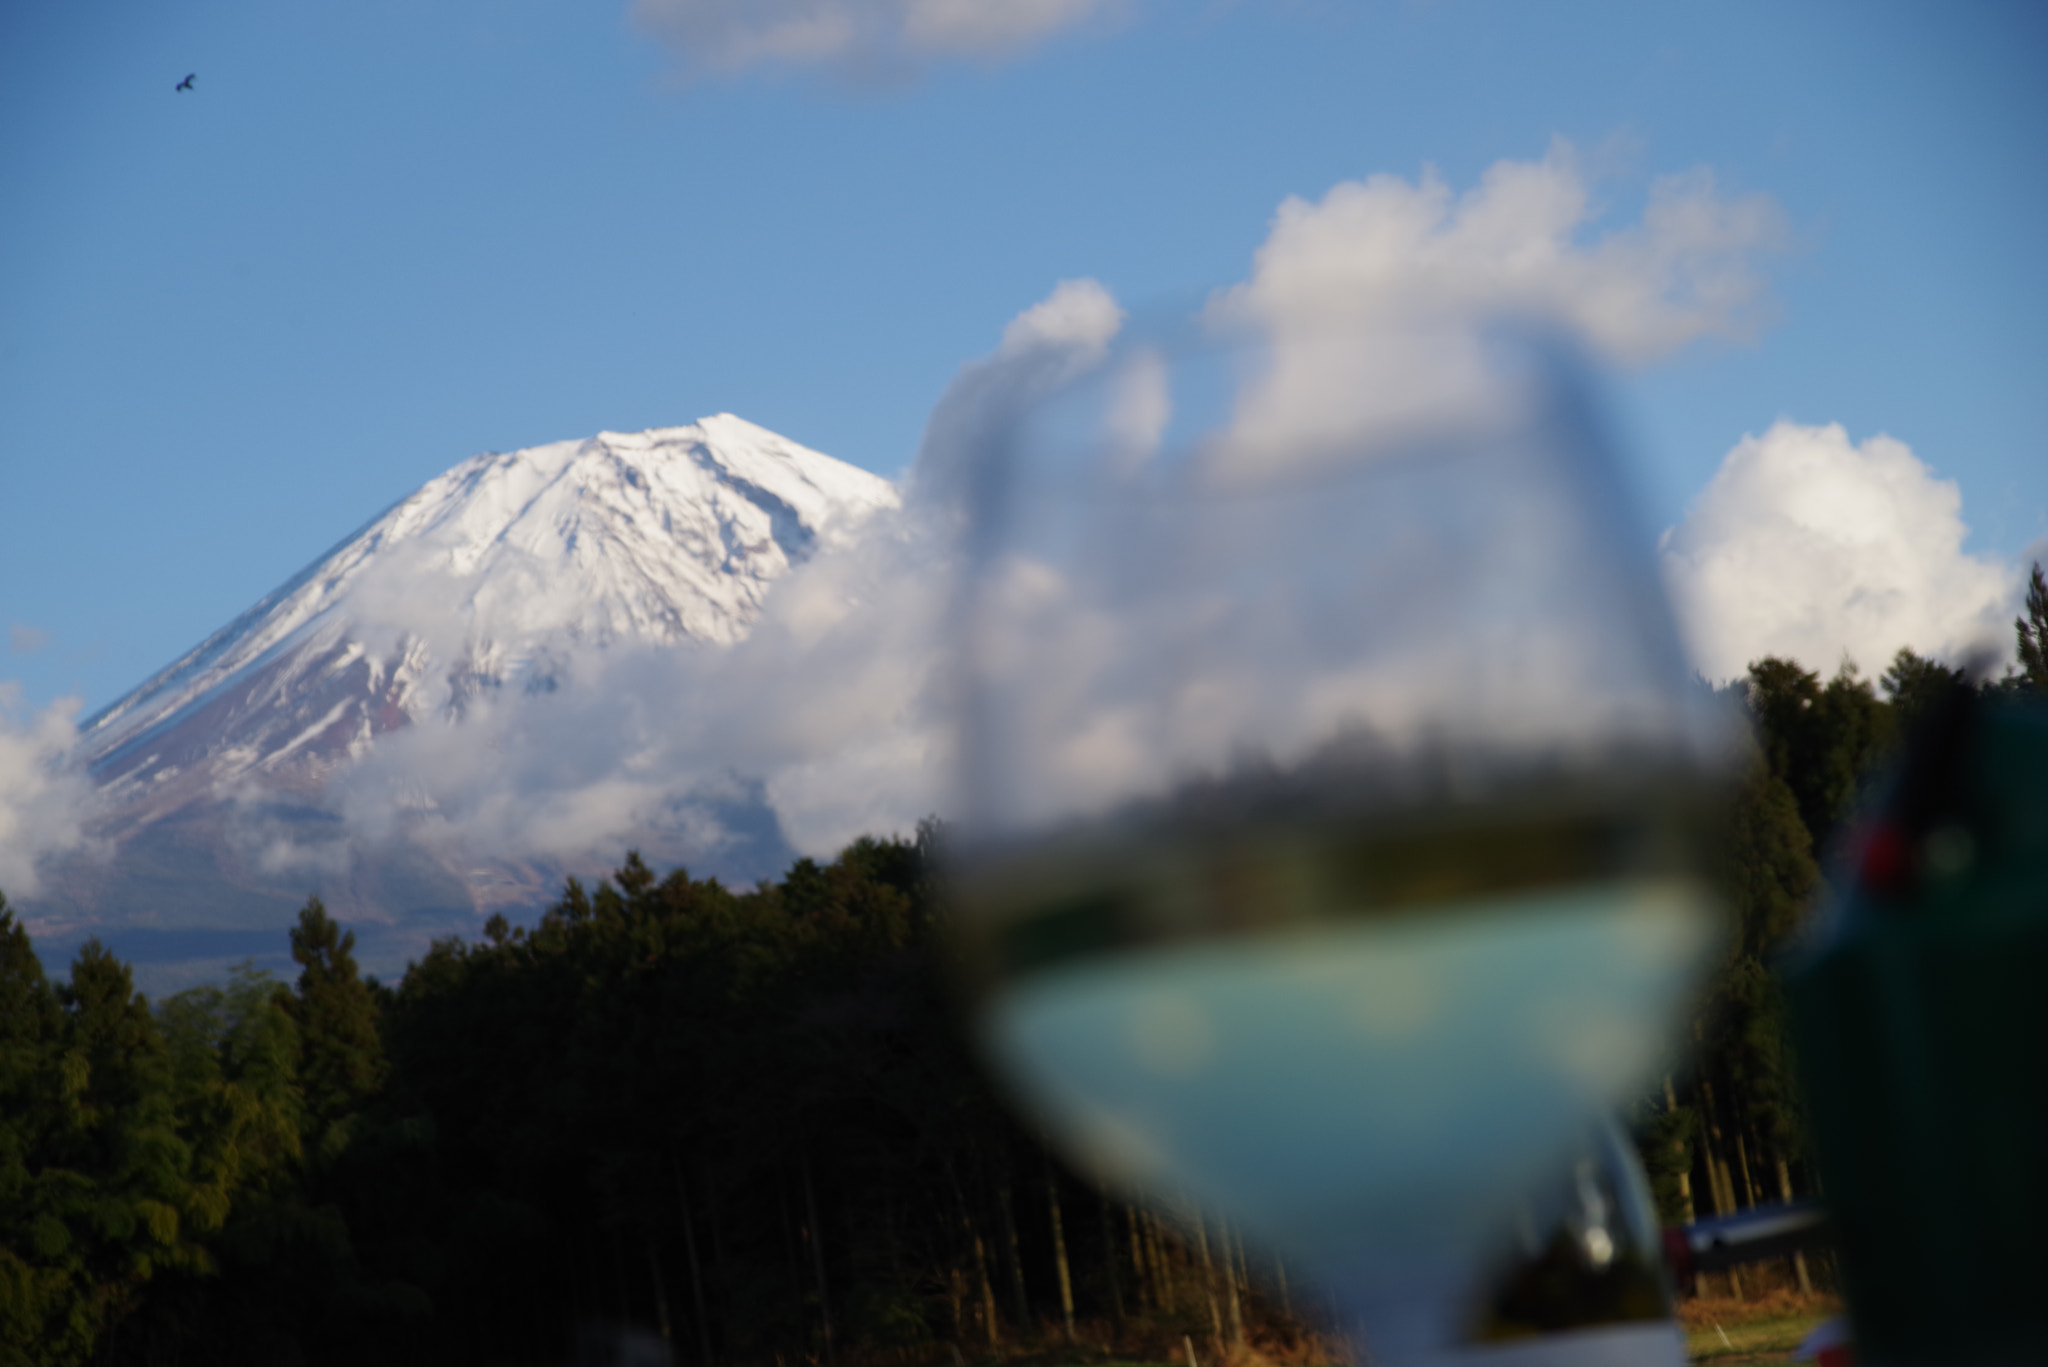 Pentax K-1 sample photo. Blue sky blended into white wine photography